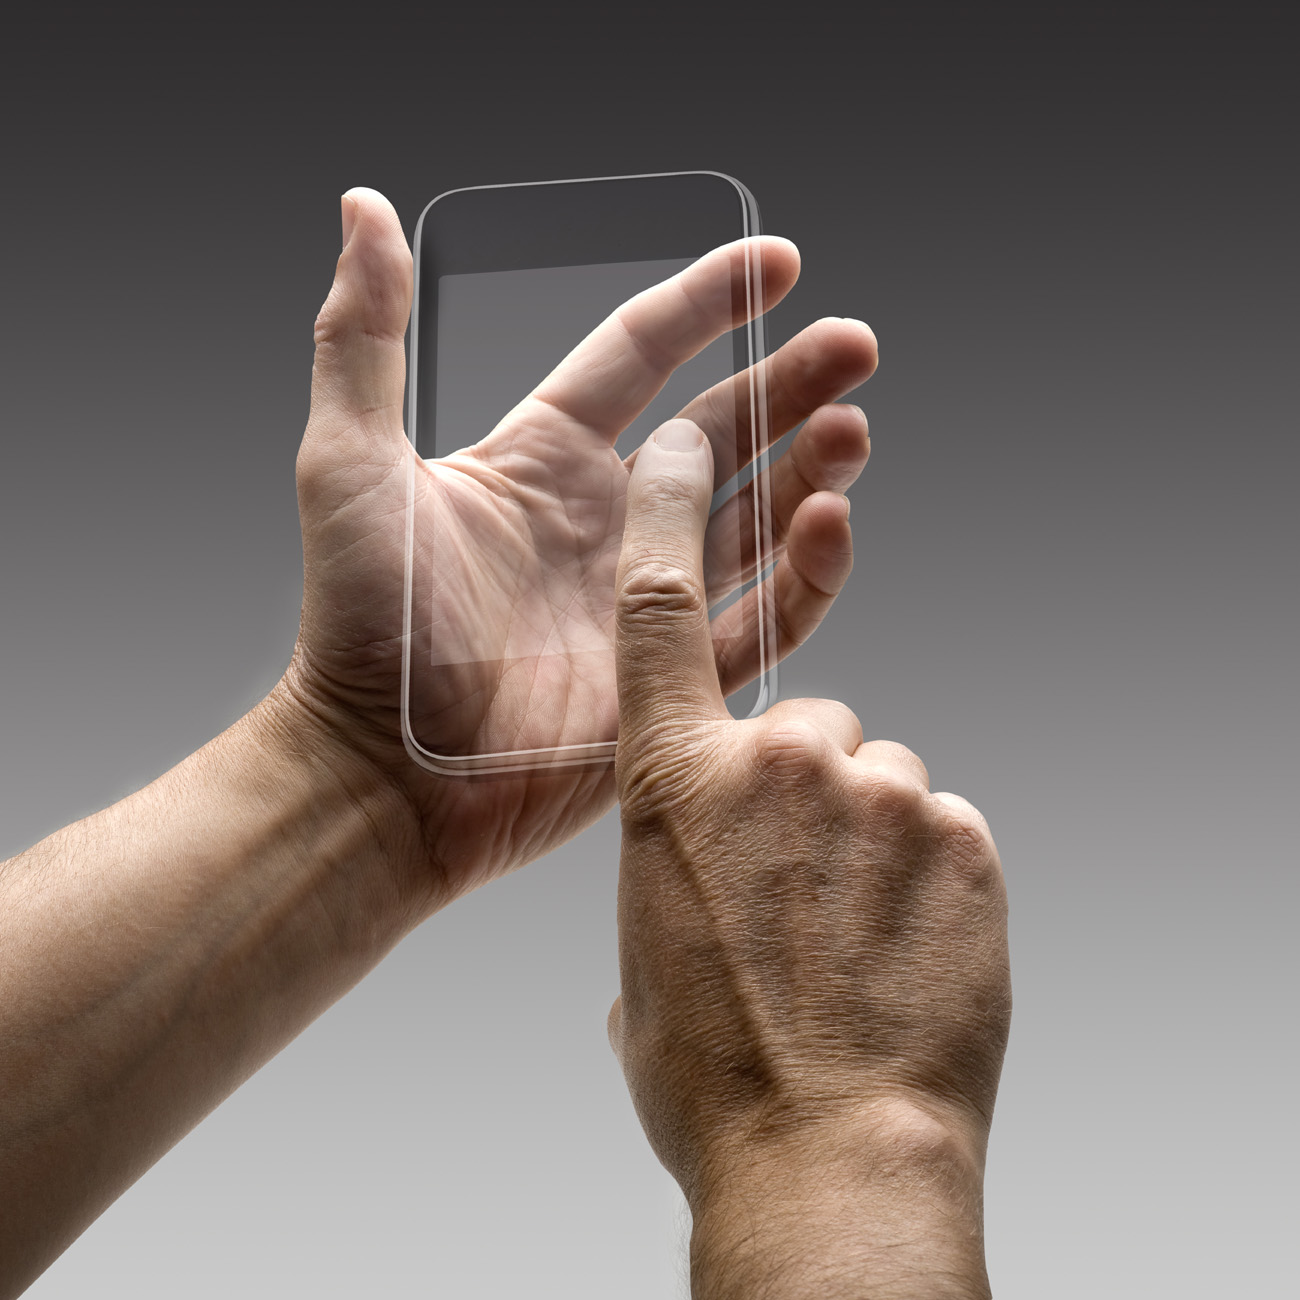 Gestures Transparent Touch Screen Phone - Touch Screen Transparent Phone - HD Wallpaper 